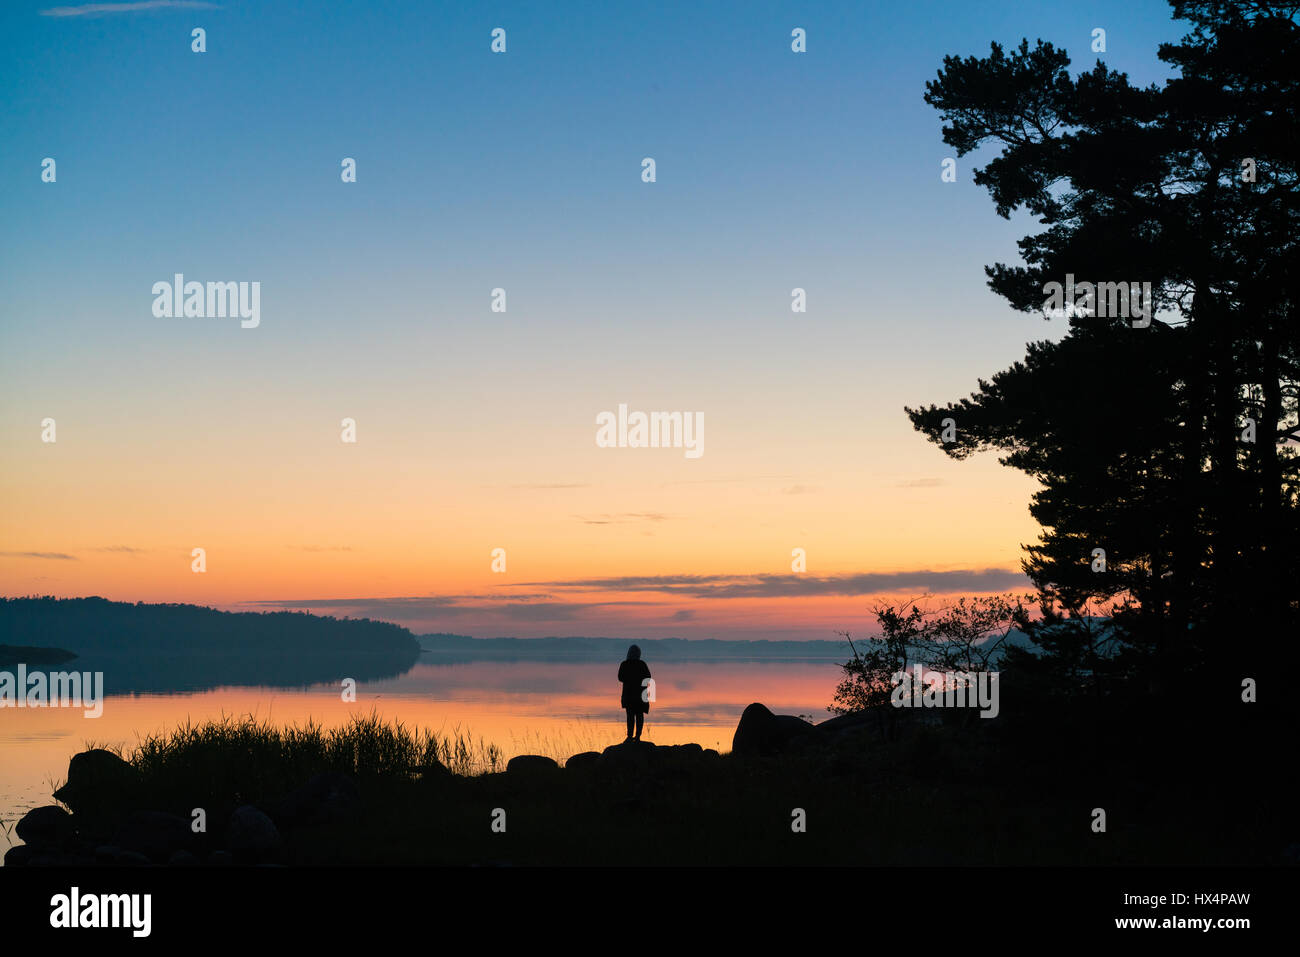 THE SWEDISH FINNISH ARCHIPELAGO IN THE BALTIC SEA AT SUNSET OR SUNRISE WITH RICH COLOURS A PERSON AND ISLAND SILHOUETTED IN THE FOREGROUND Stock Photo